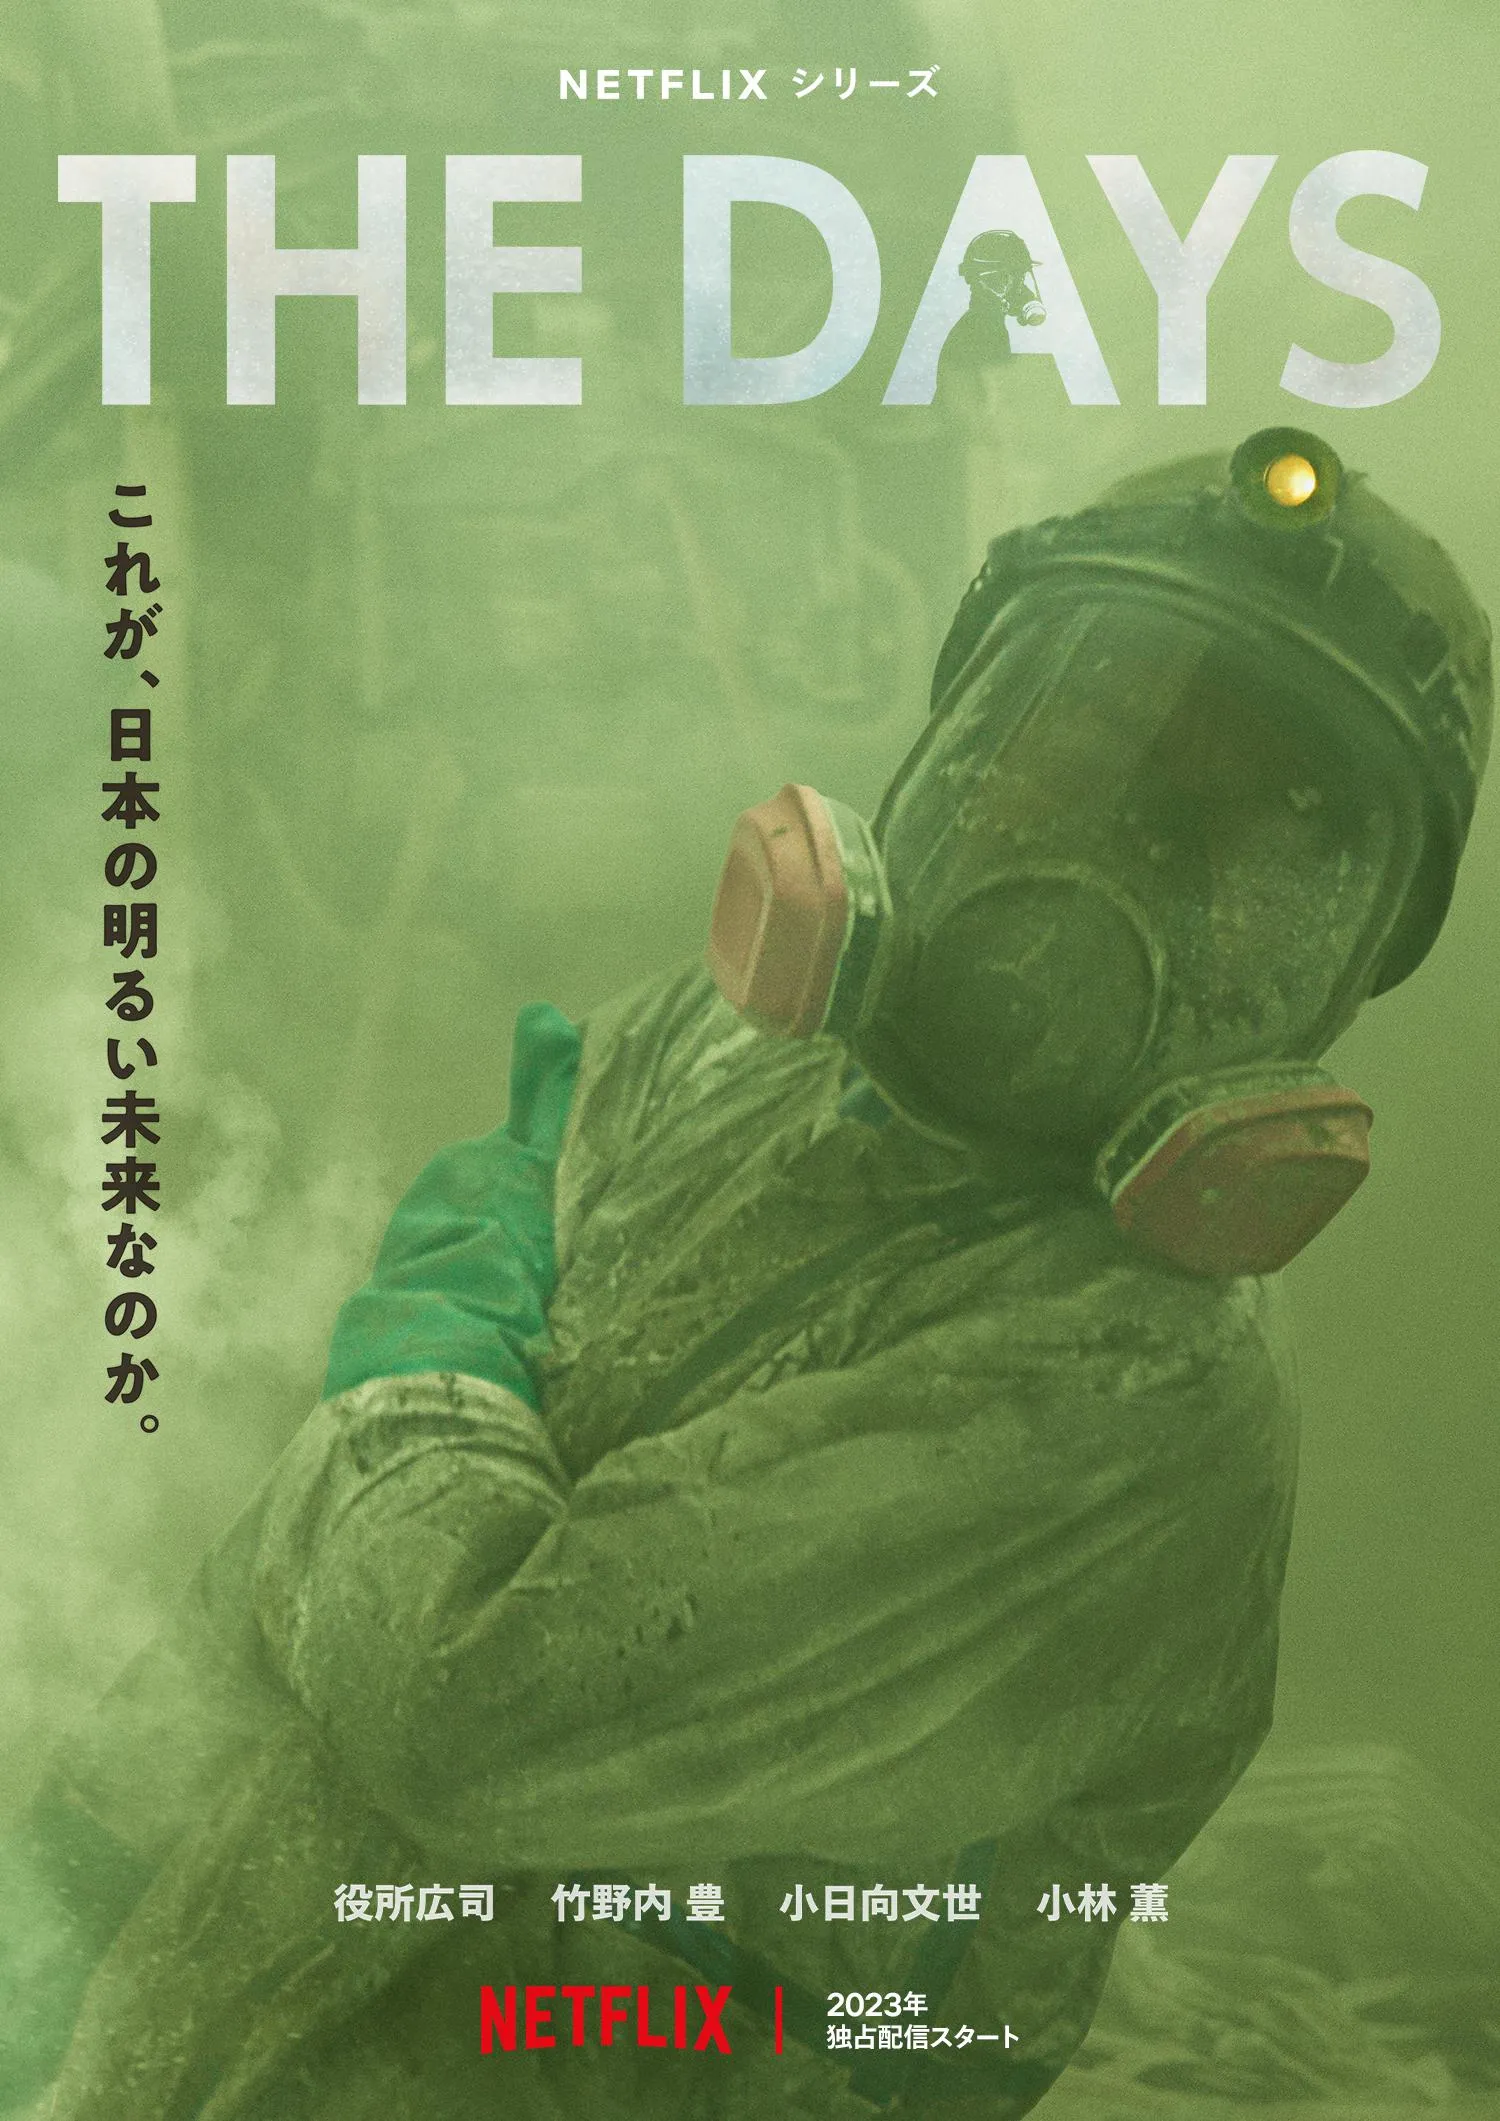 Netflix's new drama 'The Days‎' reveals the trailer, telling the key seven days of the Fukushima nuclear power plant accident | FMV6